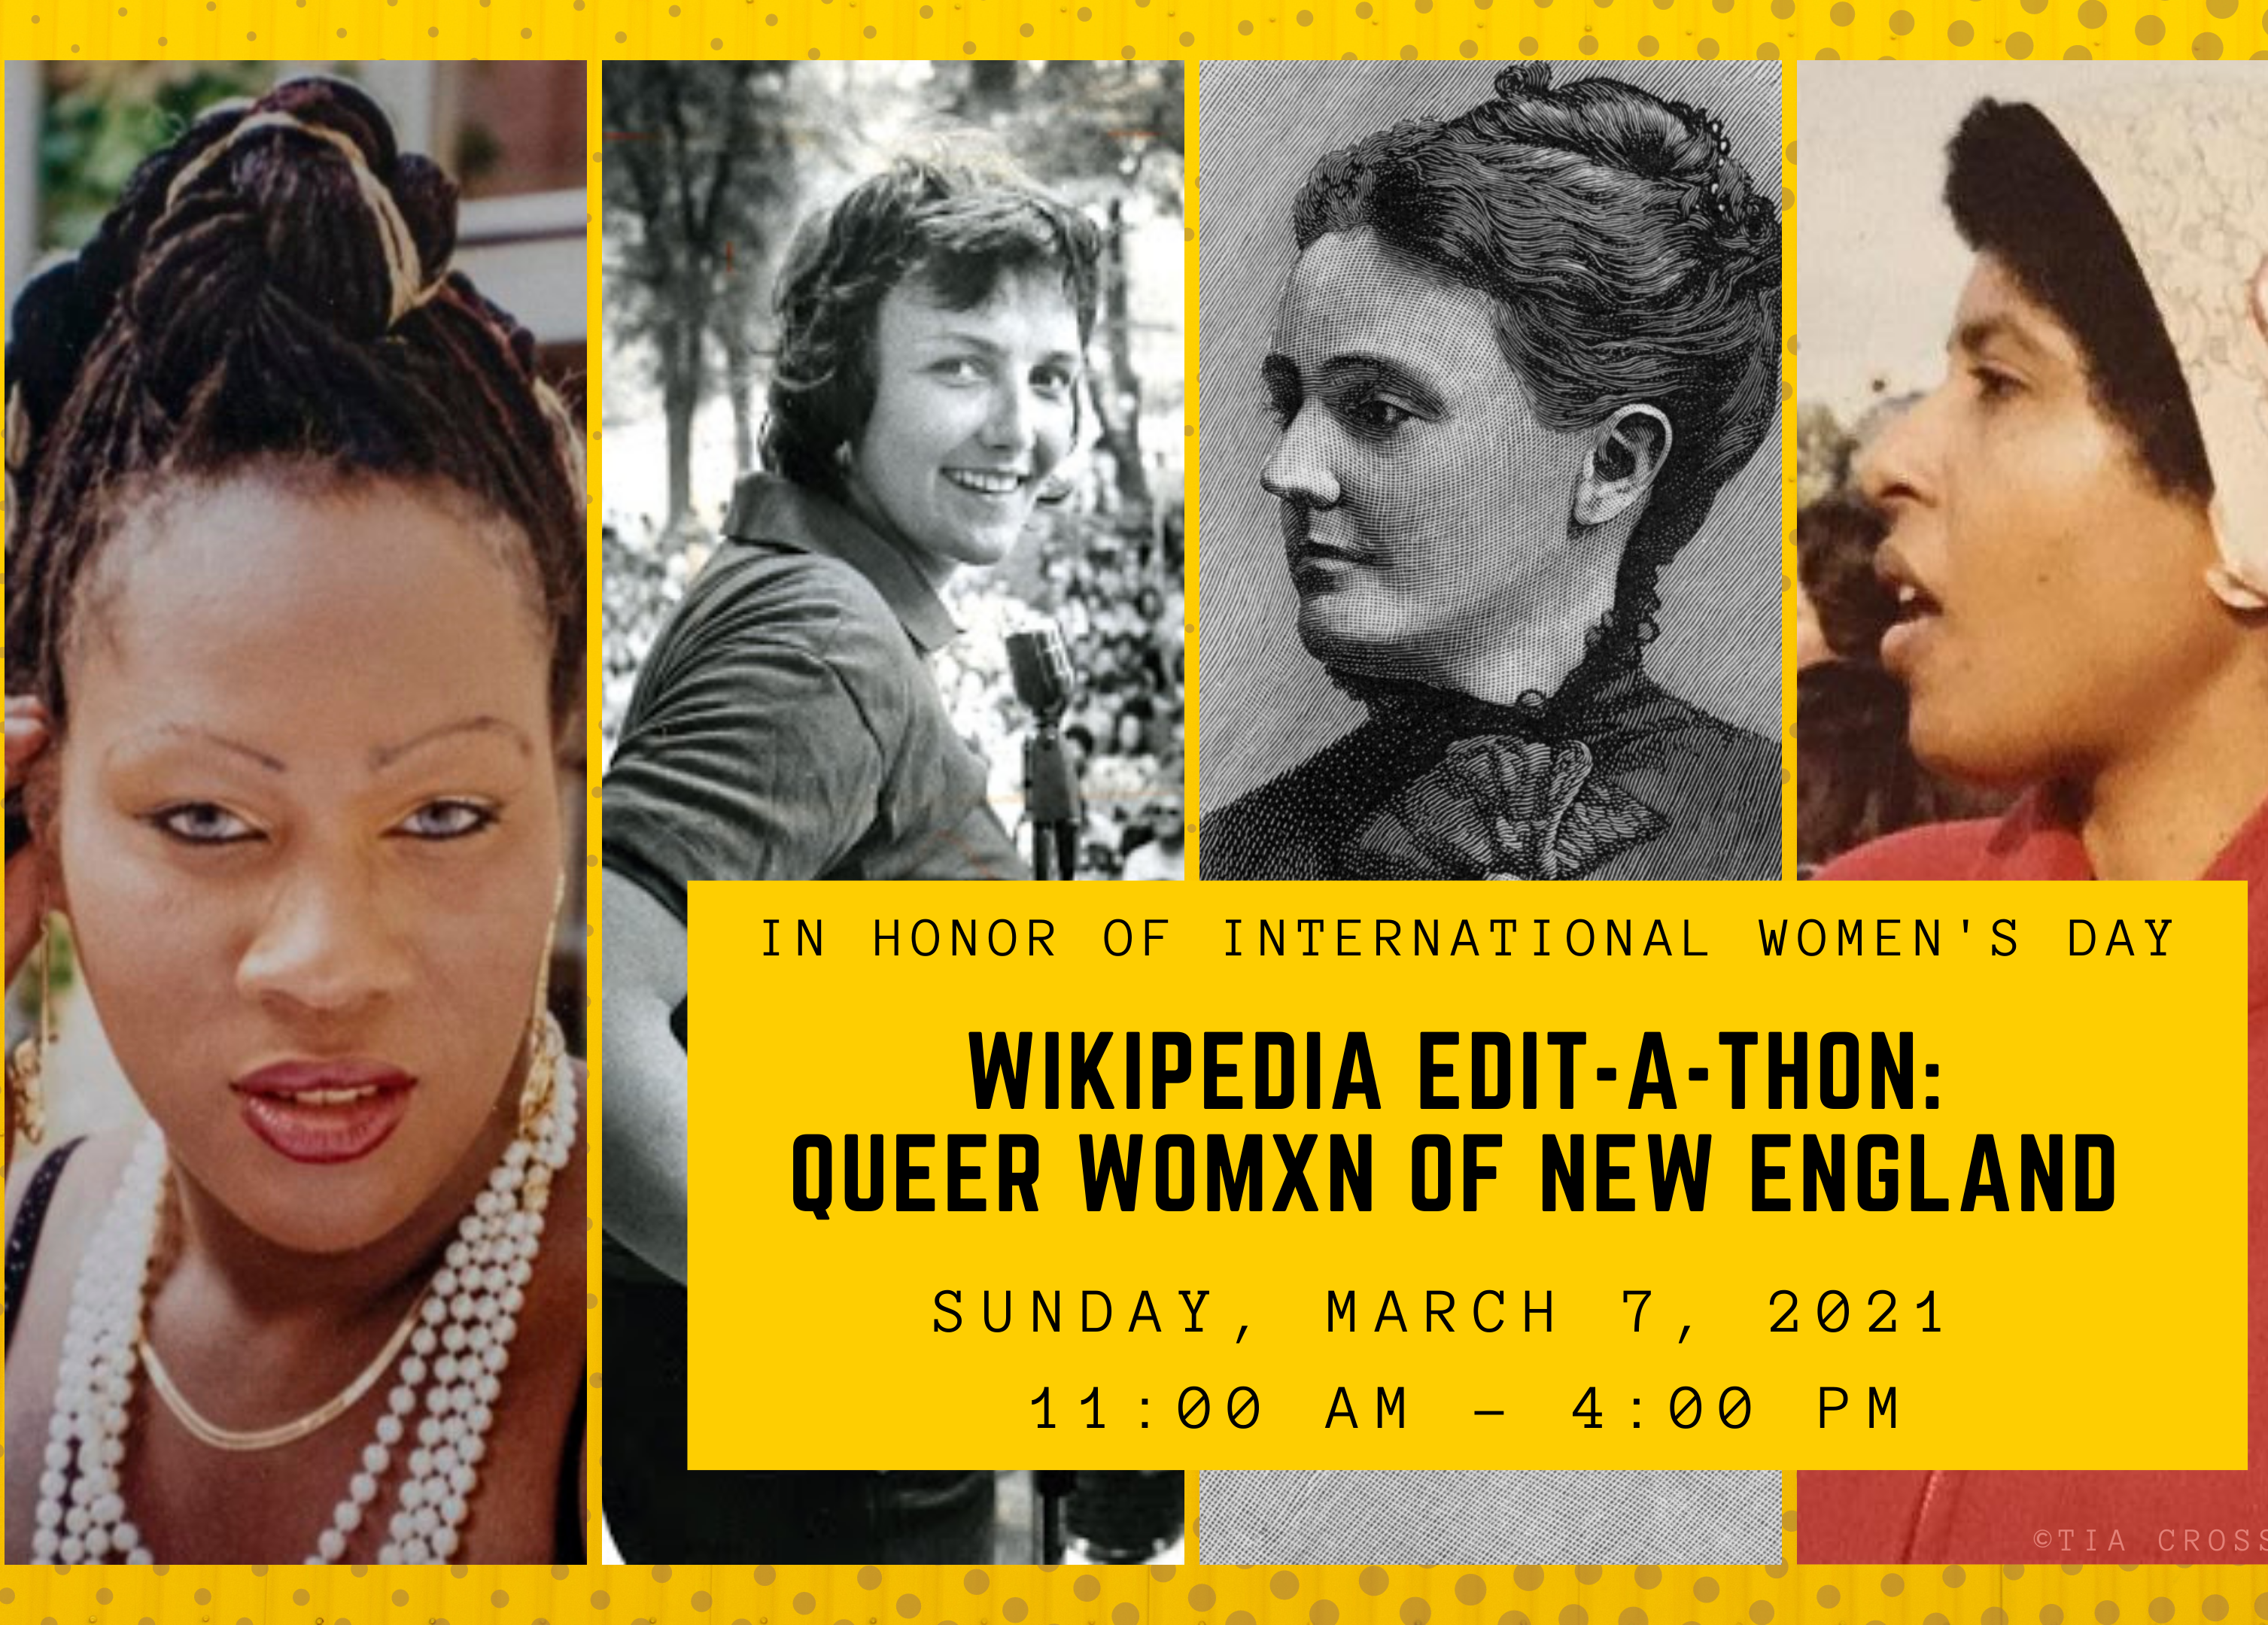 Wikipedia Edit-a-thon: Queer Womxn of New England 